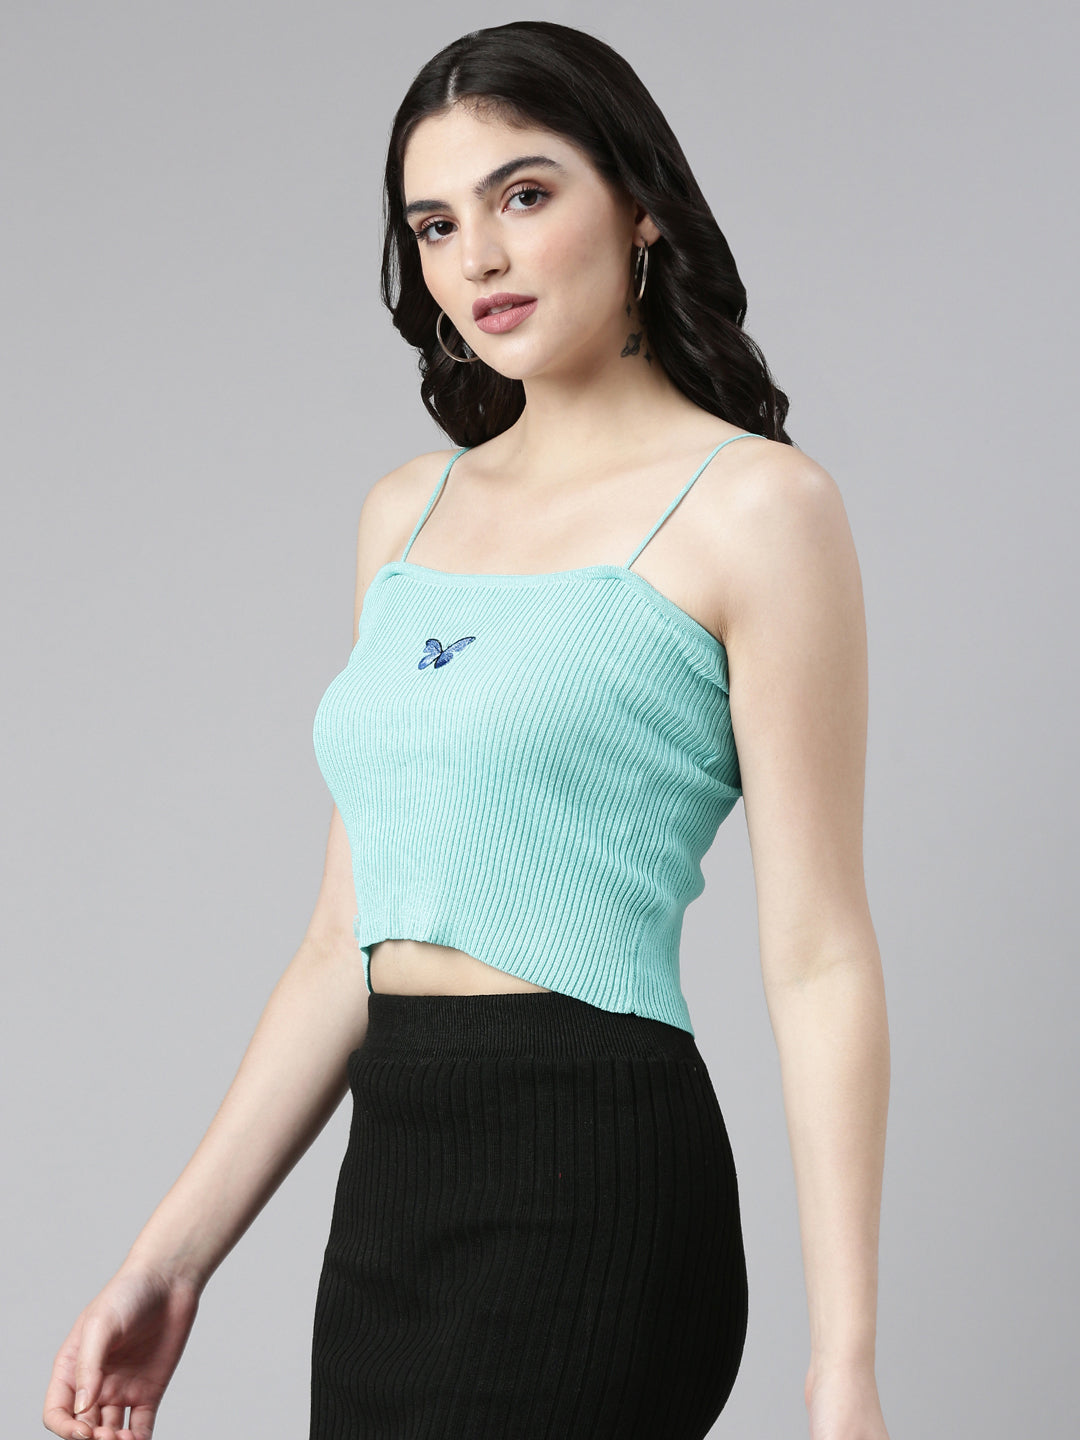 Shoulder Straps Solid Sleeveless Turquoise Blue Crop Tank Top